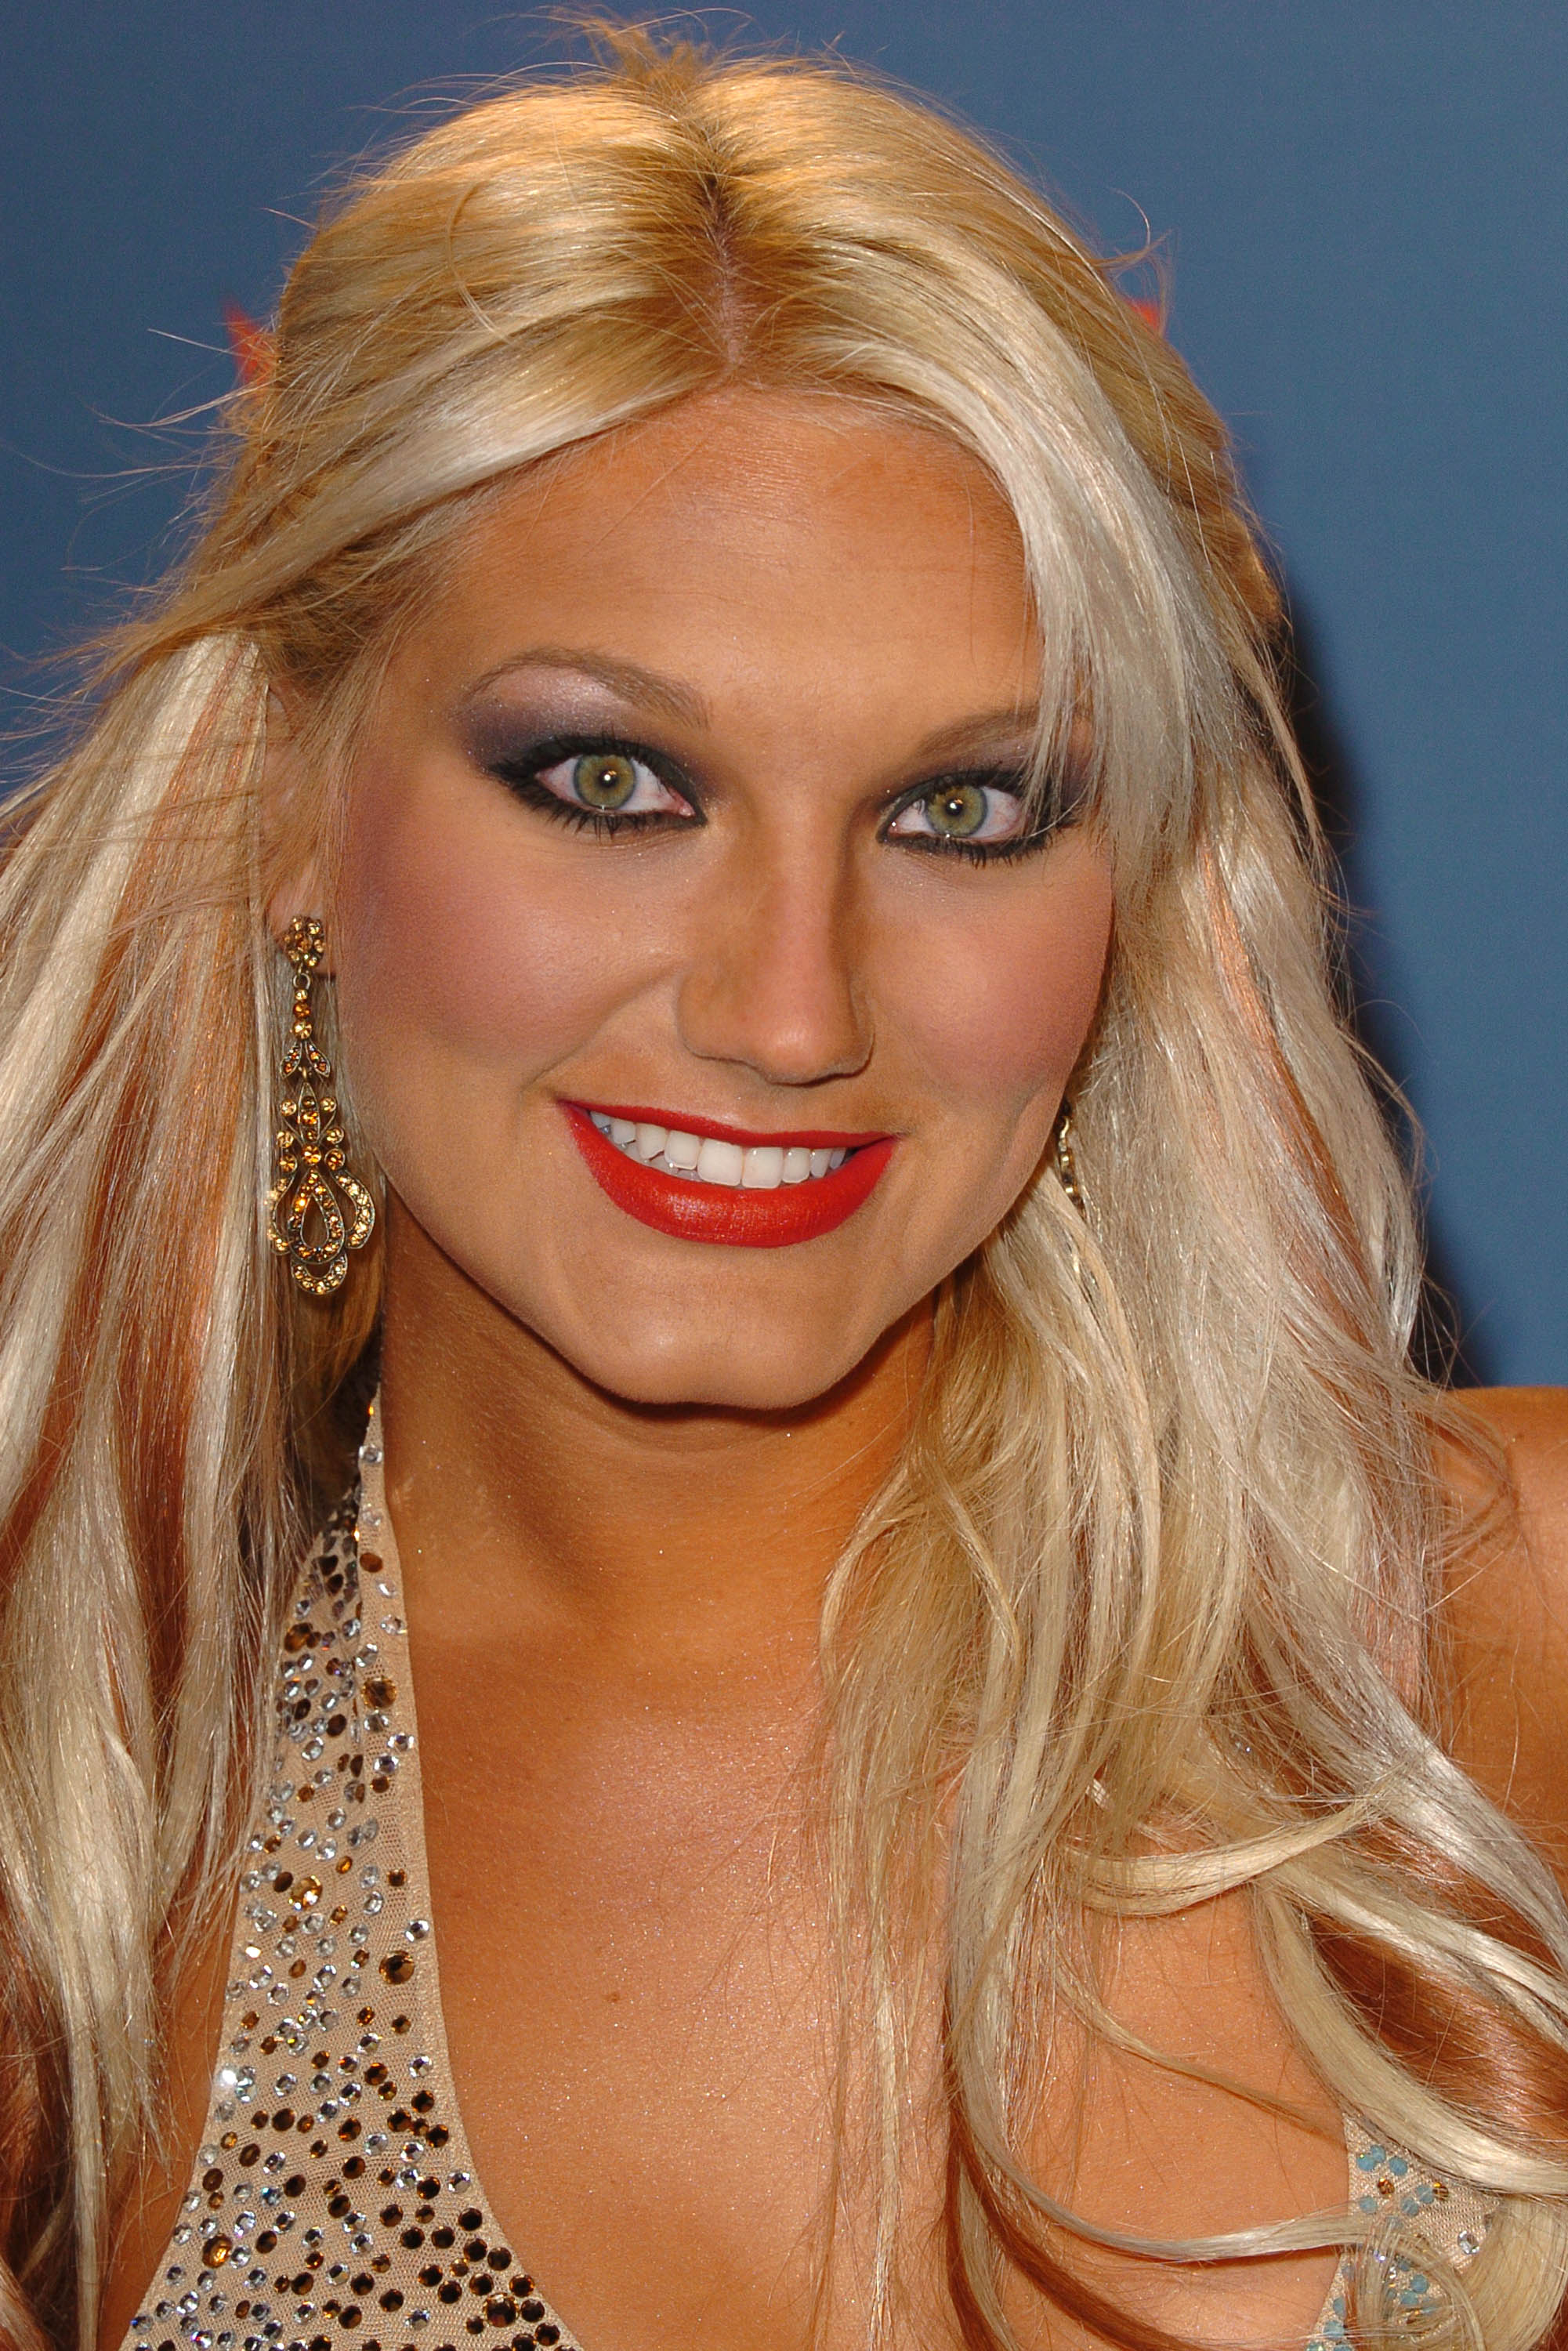 More Pictures Of Brooke Hogan. 